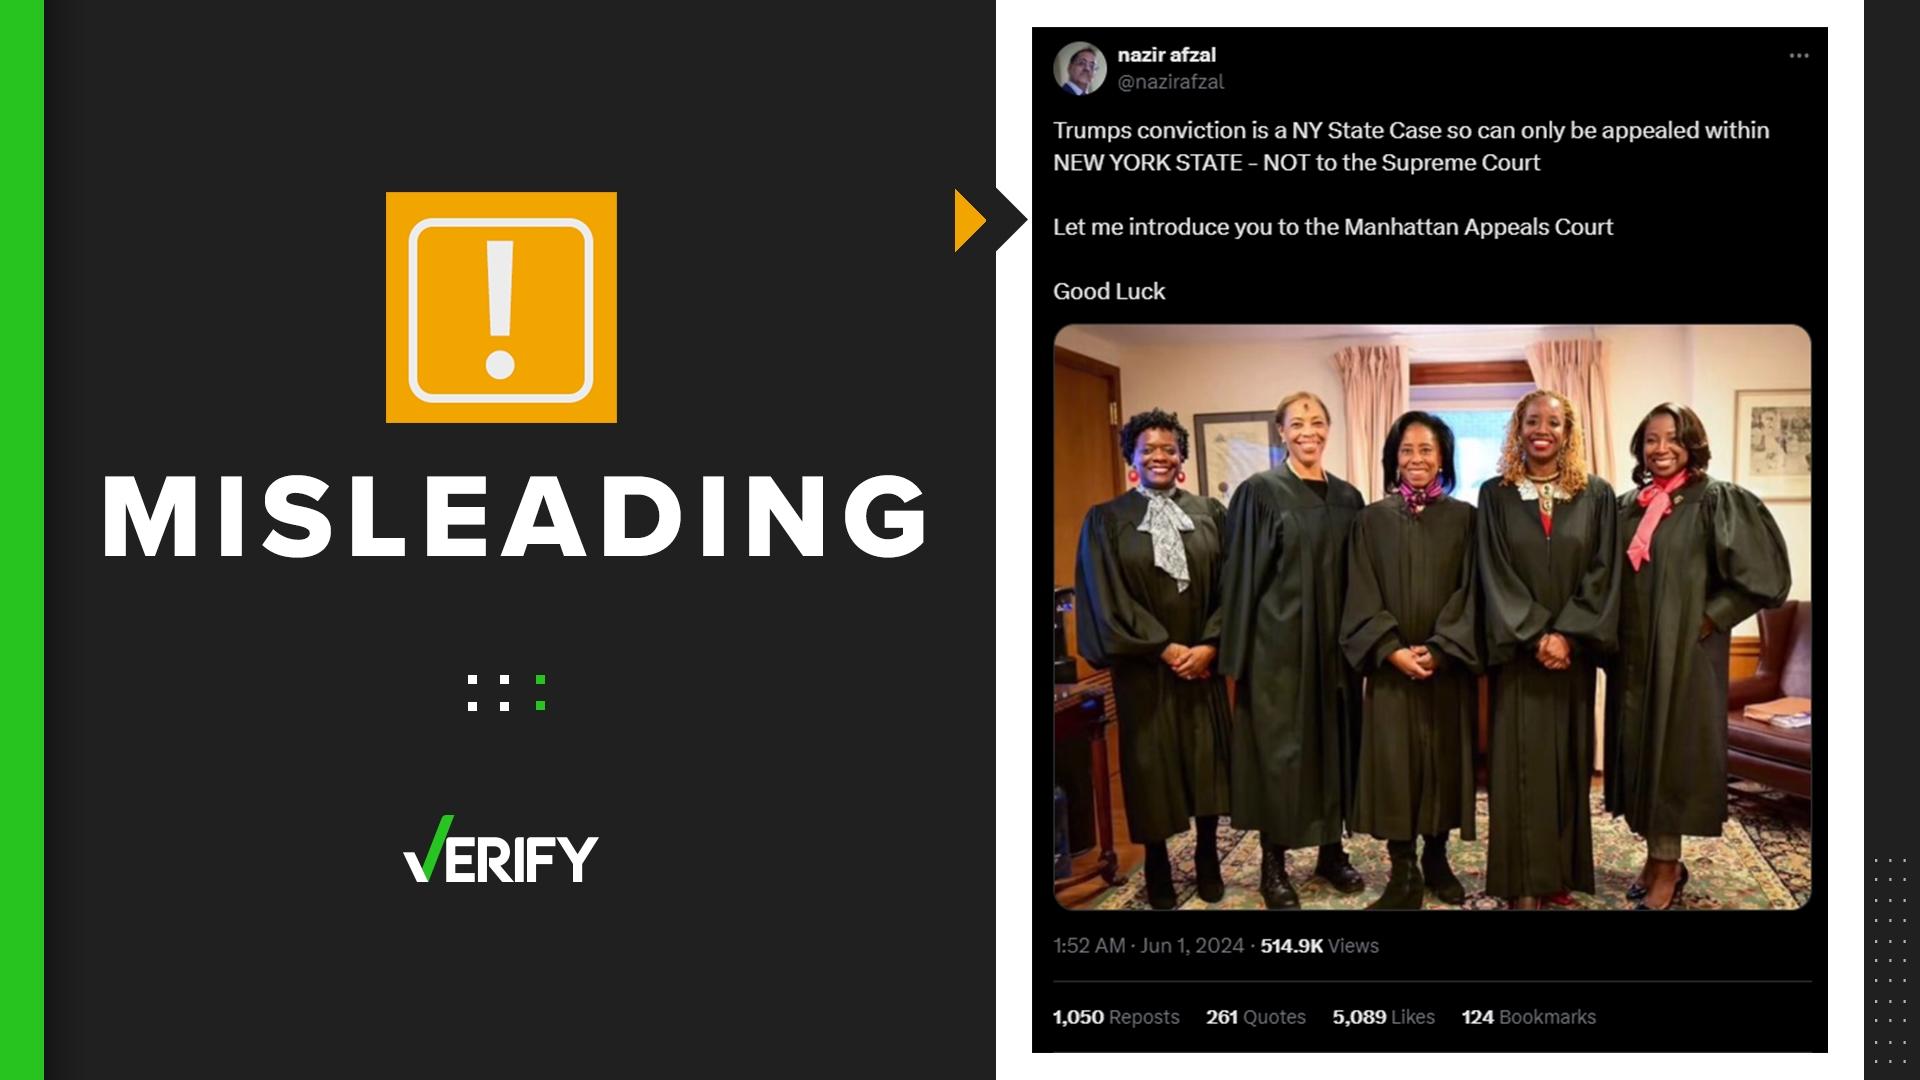 Five judges in a viral photo are among a pool of 21 on a New York court that could hear Trump’s appeal. Up to five of those 21 judges would be randomly chosen.